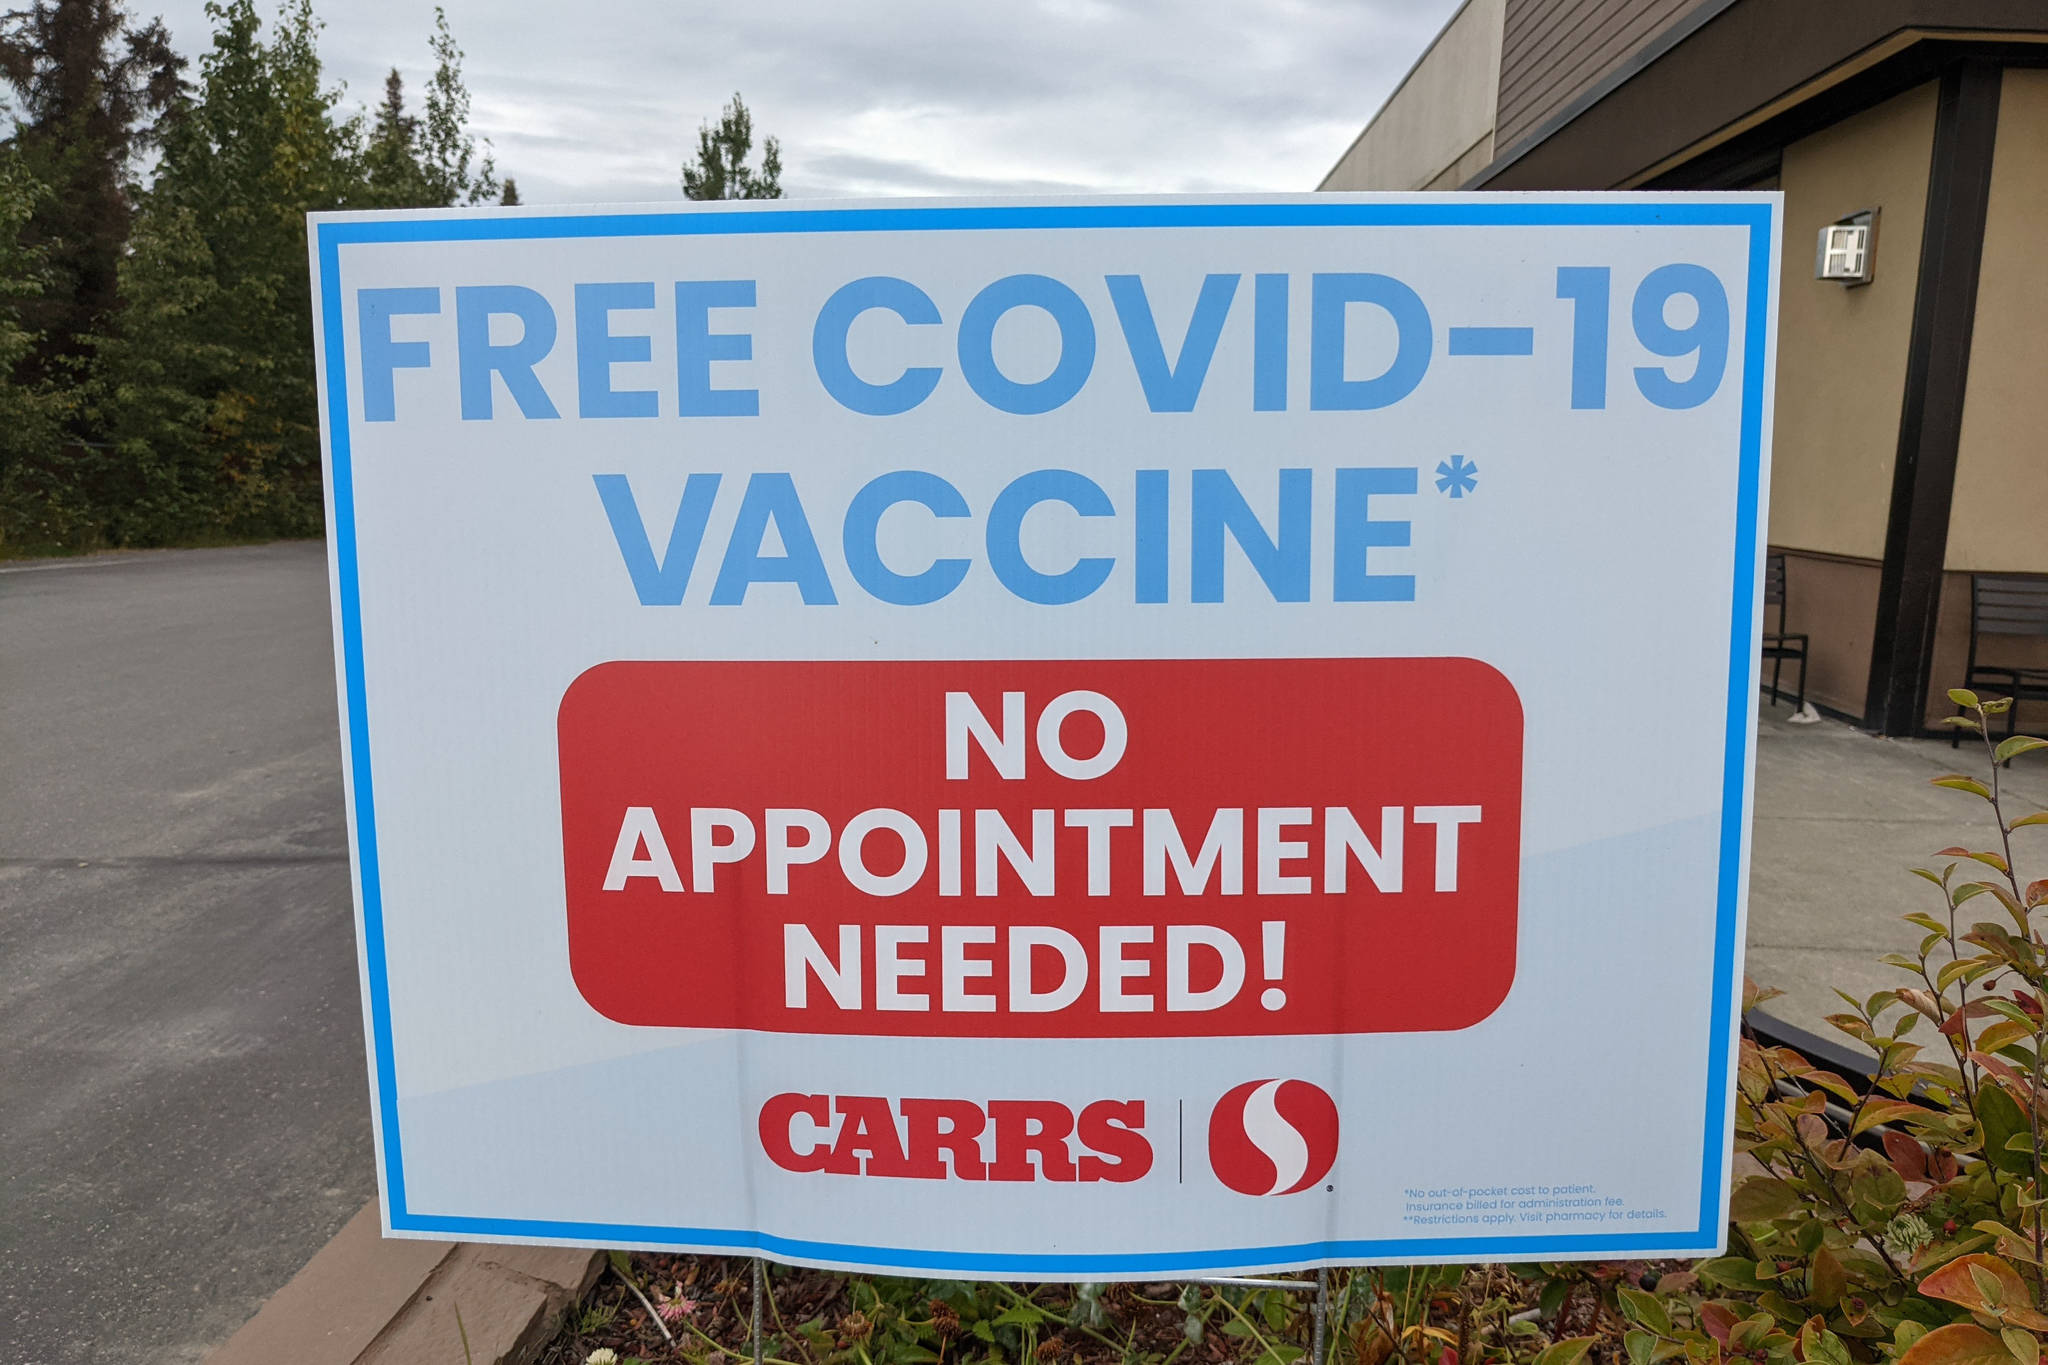 A sign advertising free COVID-19 vaccines stands outside Safeway on Wednesday, Sept. 1, 2021, in Kenai, Alaska. (Photo by Erin Thompson/Peninsula Clarion)